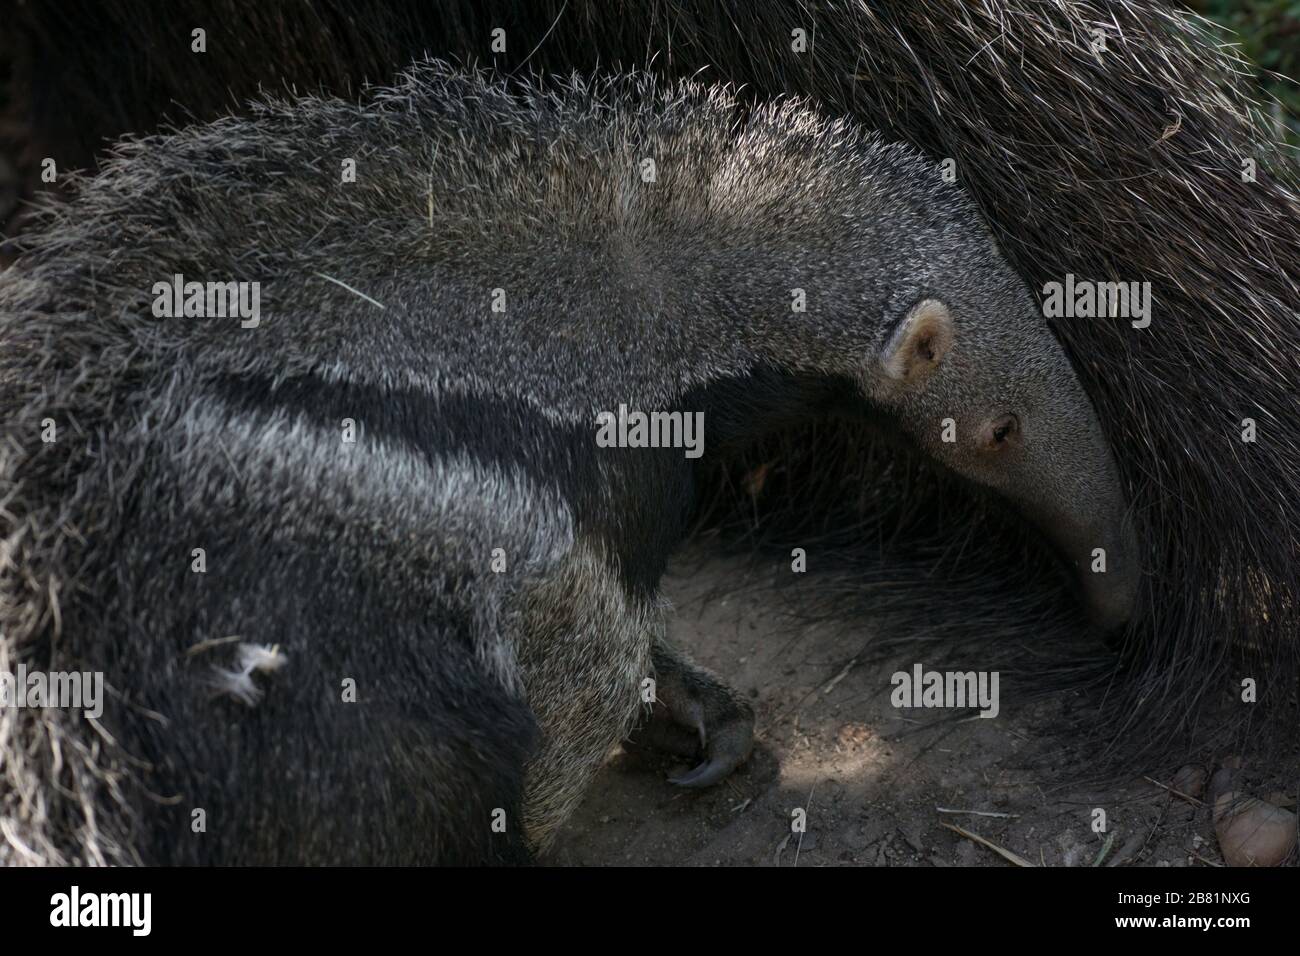 Adorable moment of a female giant anteater playing with her calf on the sand Stock Photo